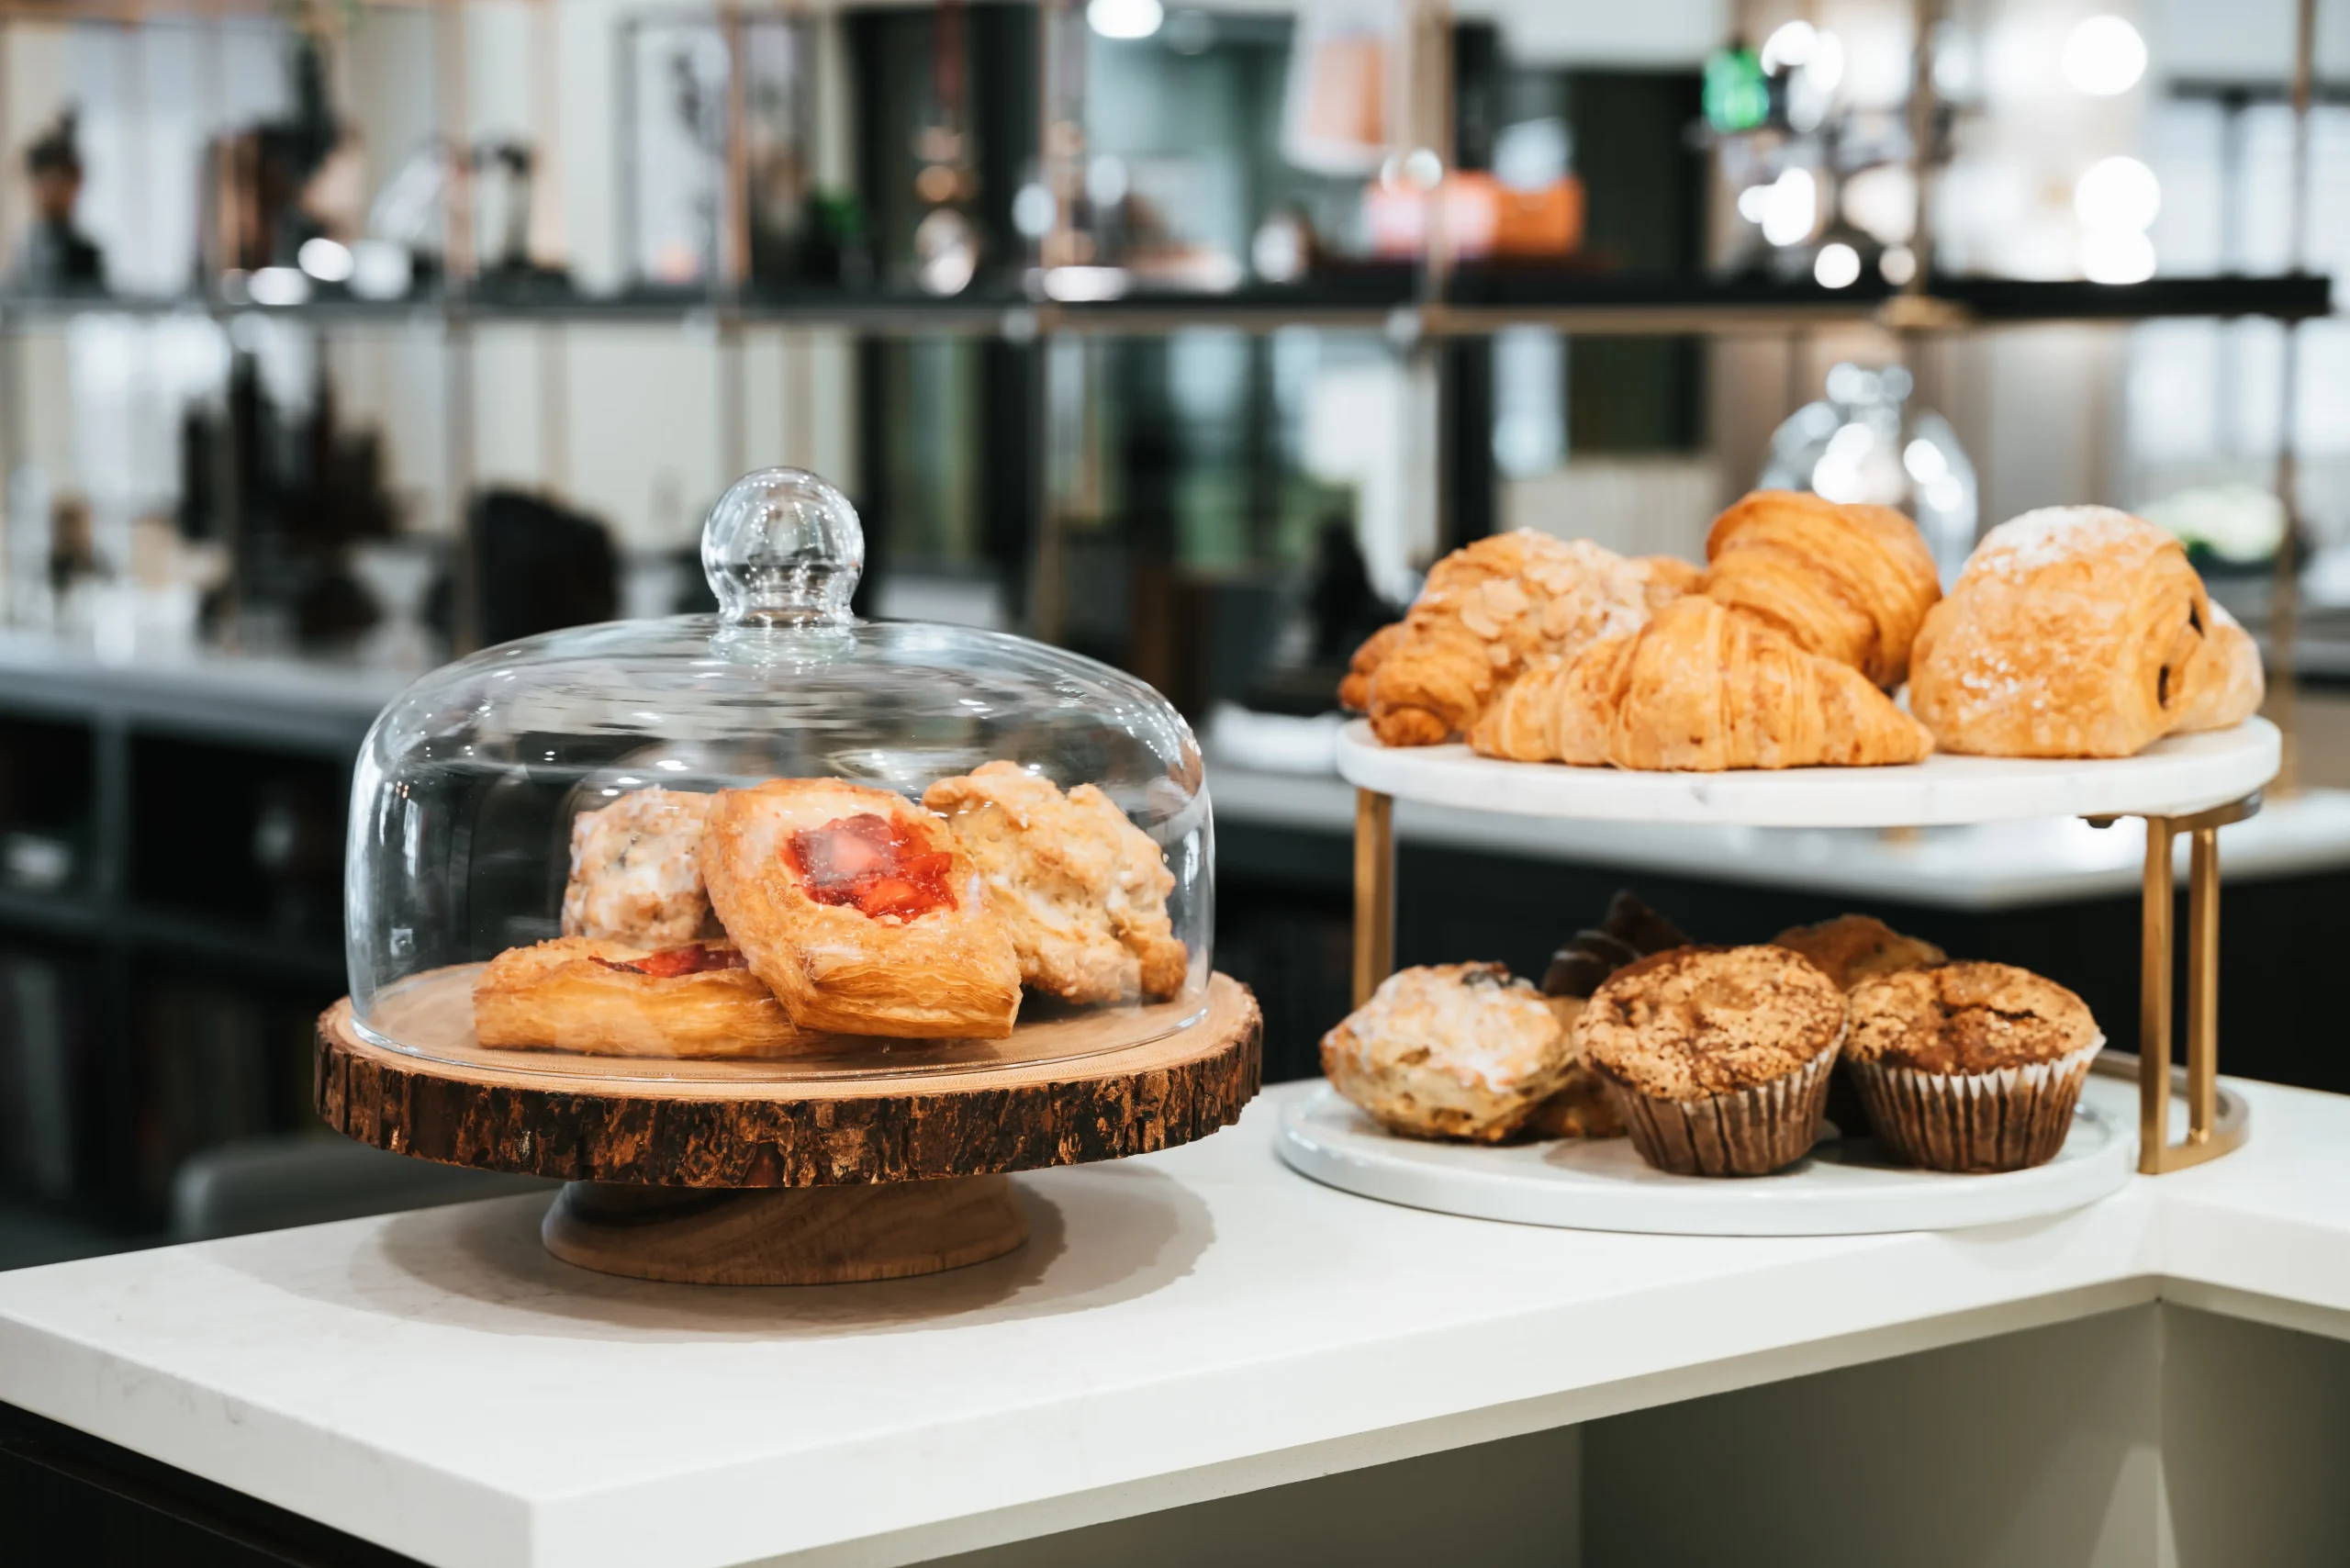 A selection of pastries in multiple dishes.